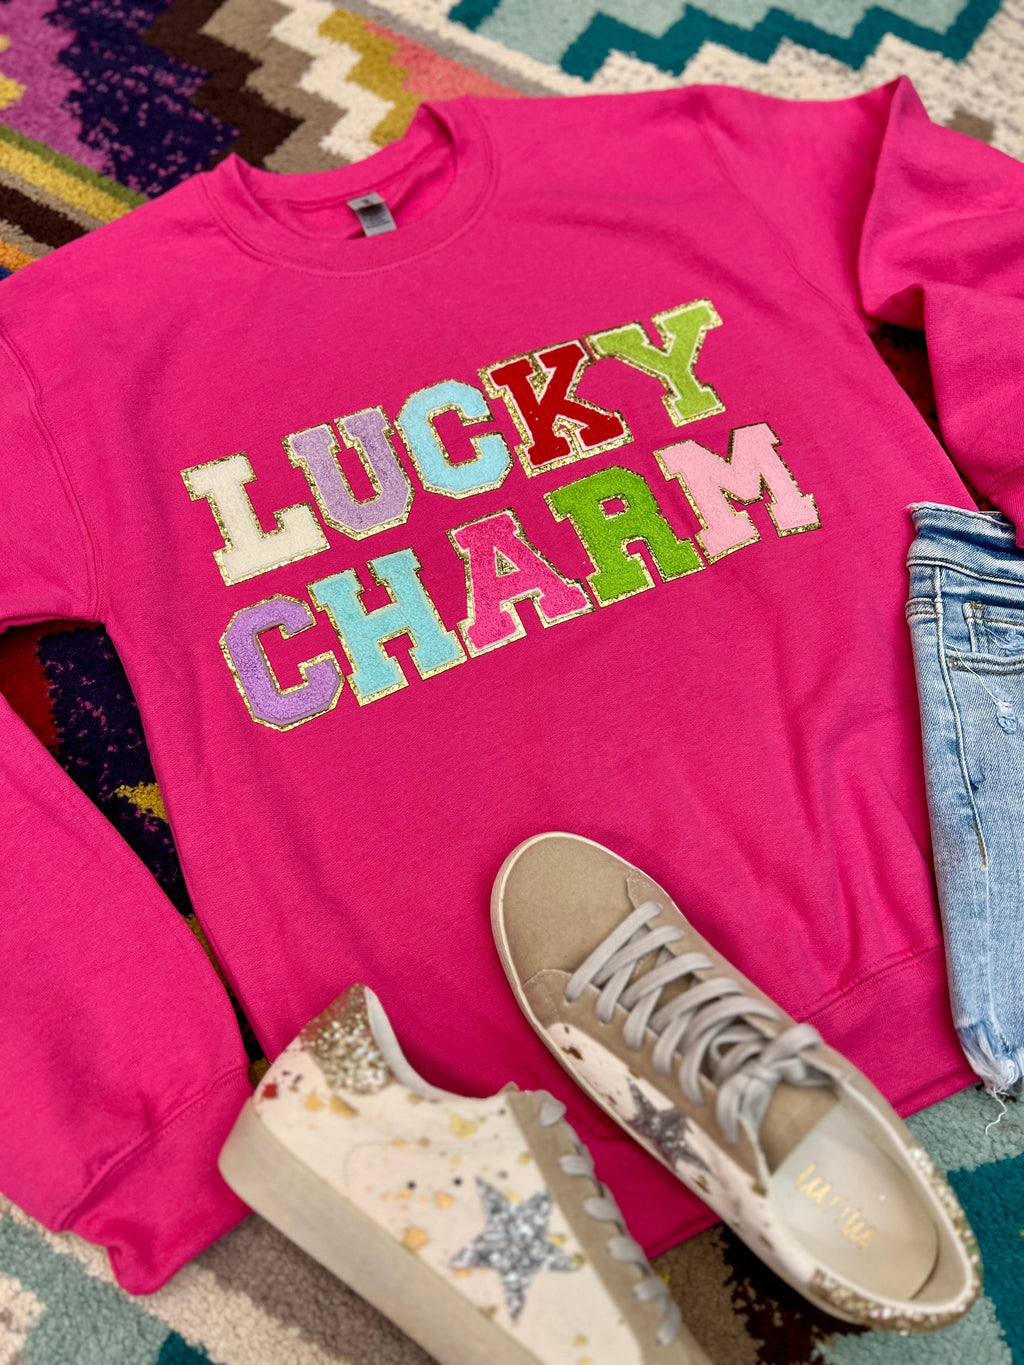 Sweatshirt. Pink sweatshirt. Lucky Charm top. Chenille letters. St. Patrick's Day Sweater. Women's sweatshirt. Women's holiday top. Cute sweatshirt. Trendy tops. Trending style. Outfits. Women's clothing. Women's boutique. Fashion trends. Easy outfits. Comfortable style. Small business. Woman owned business.